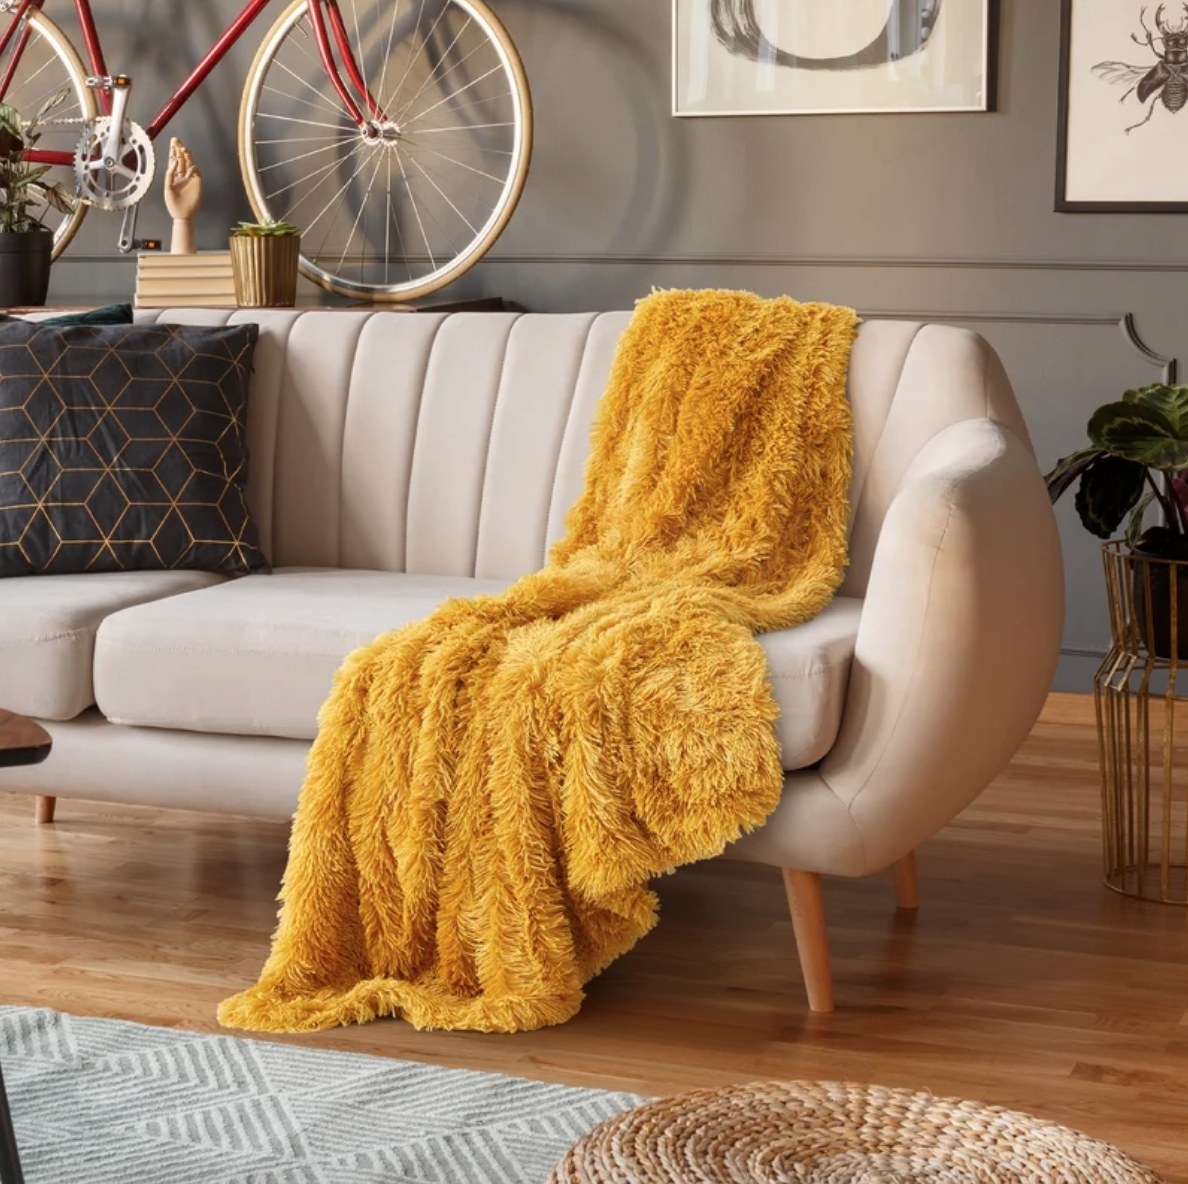 Mustard yellow faux fur blanket on beige couch